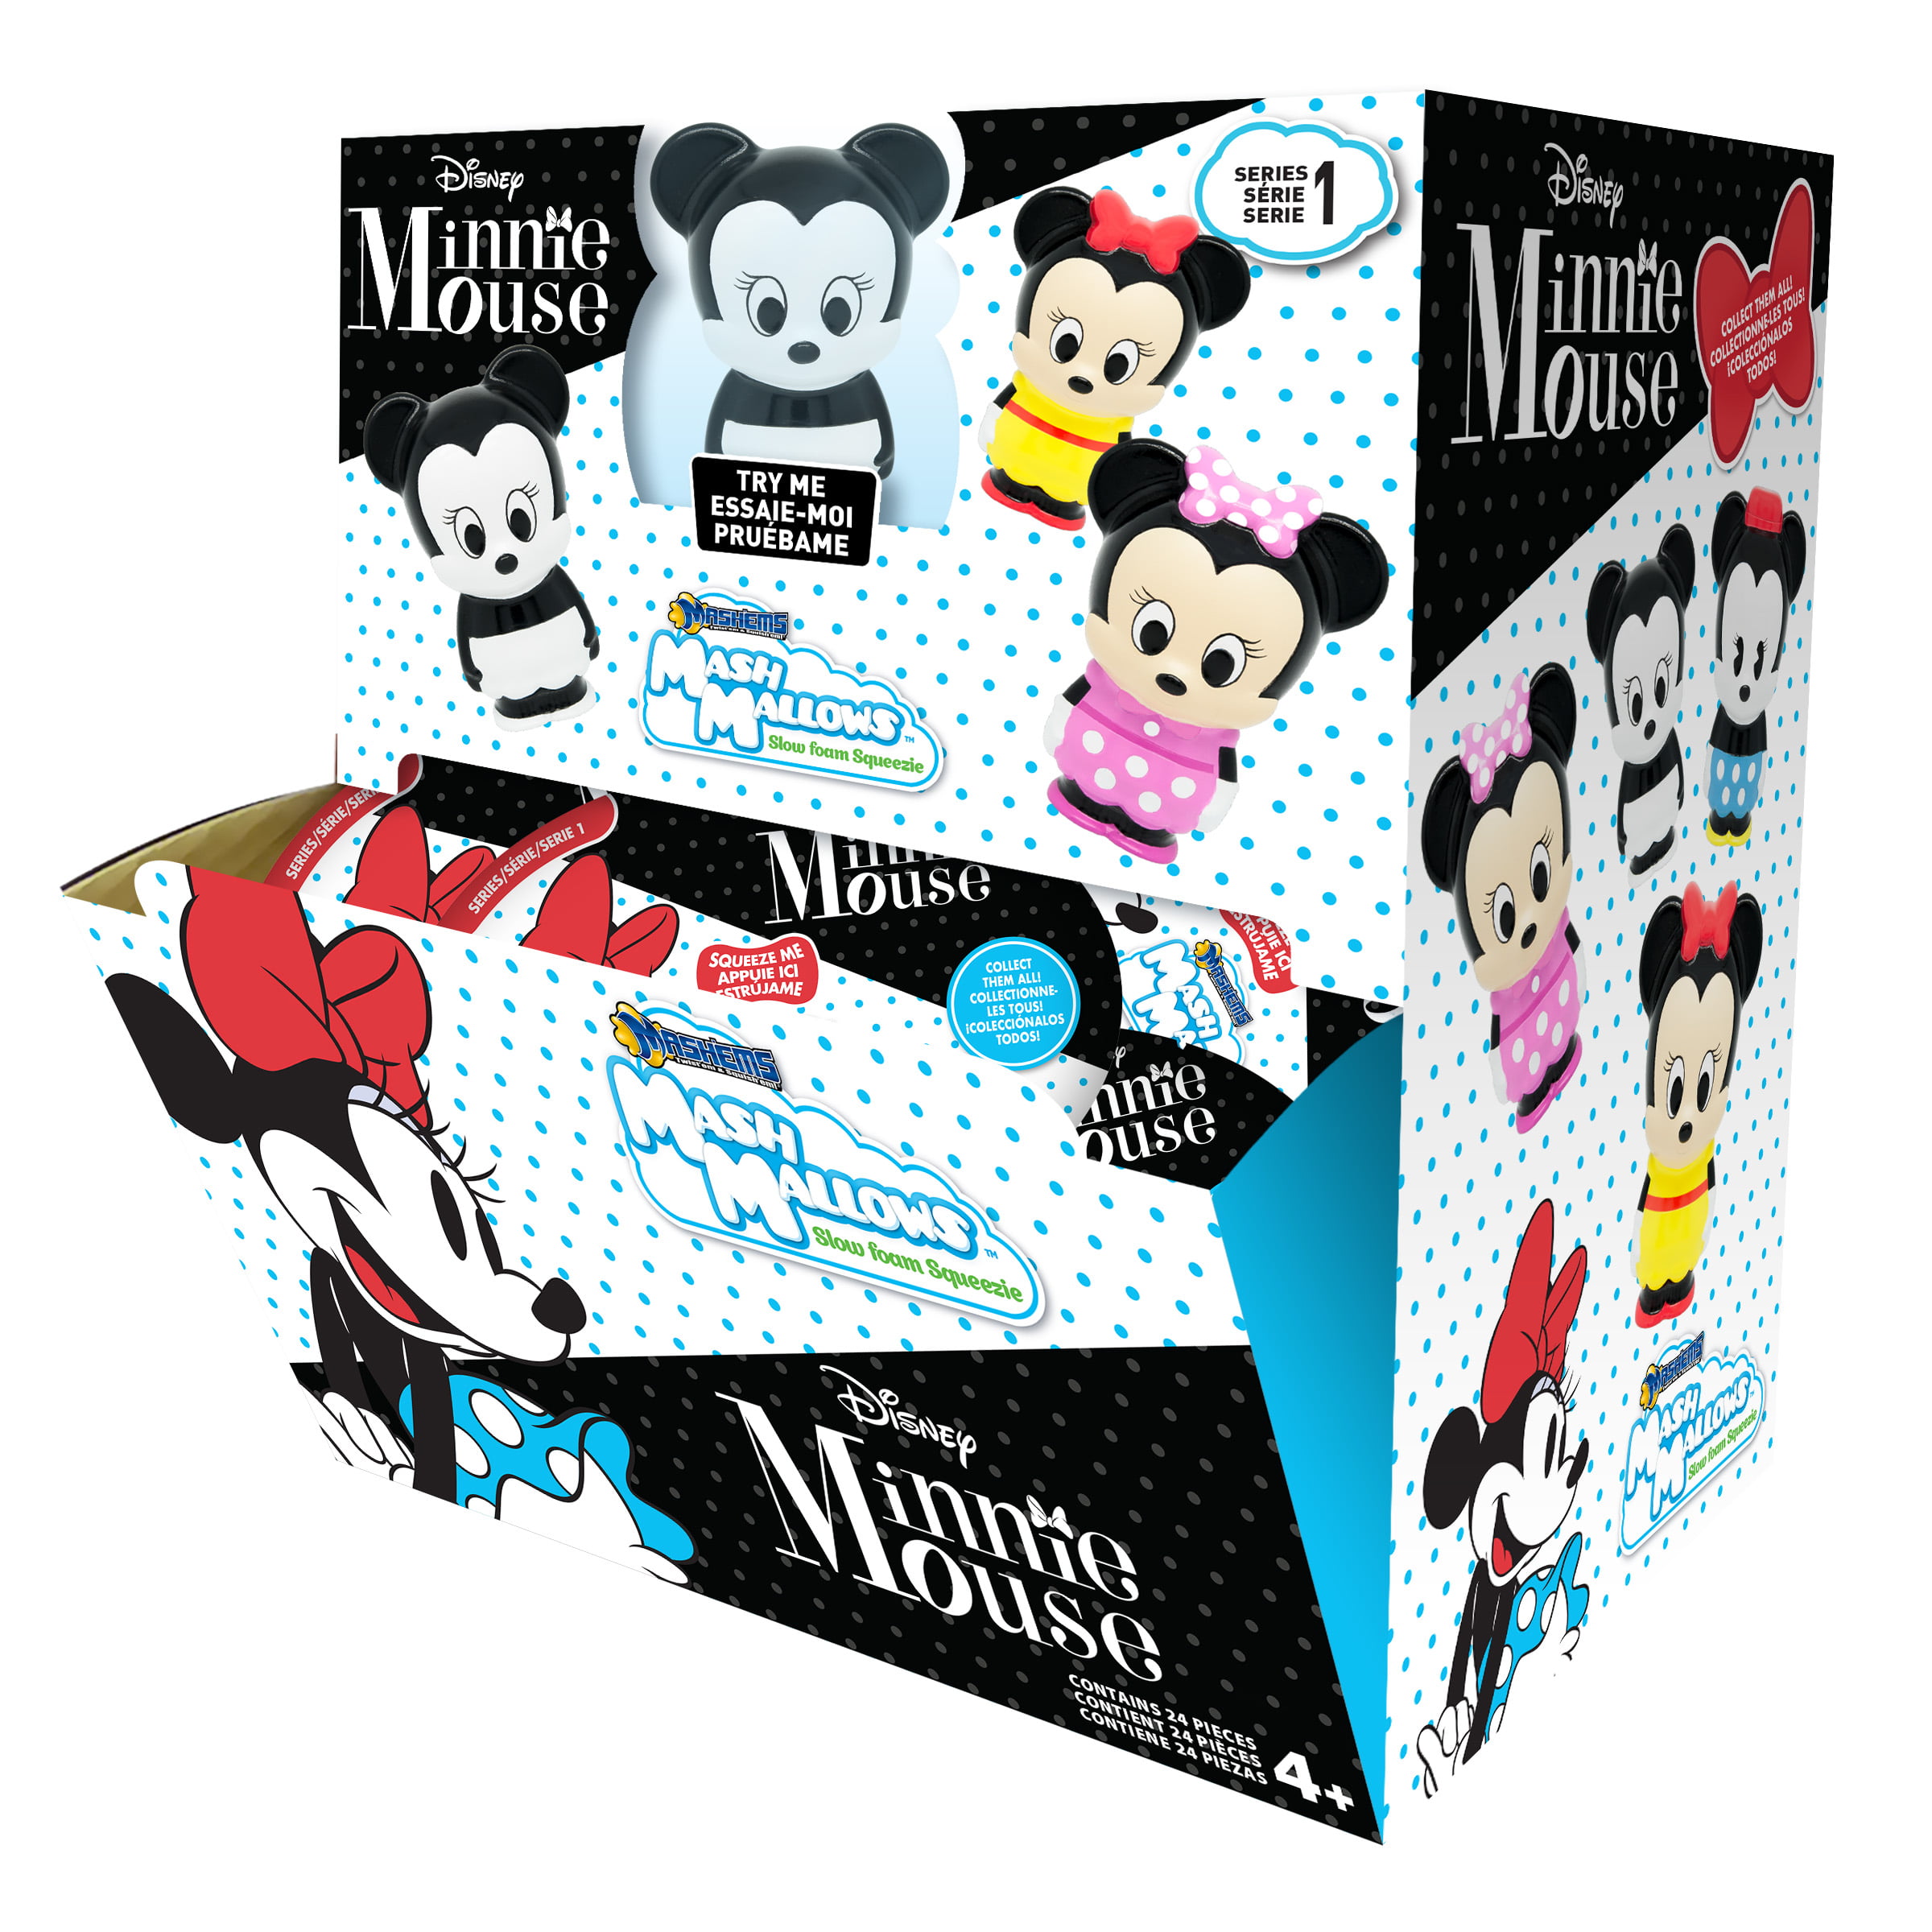 5 Disney Minnie Mouse Mash Mallows Mayhems Slow Foam Squeeze Series 1 for sale online 